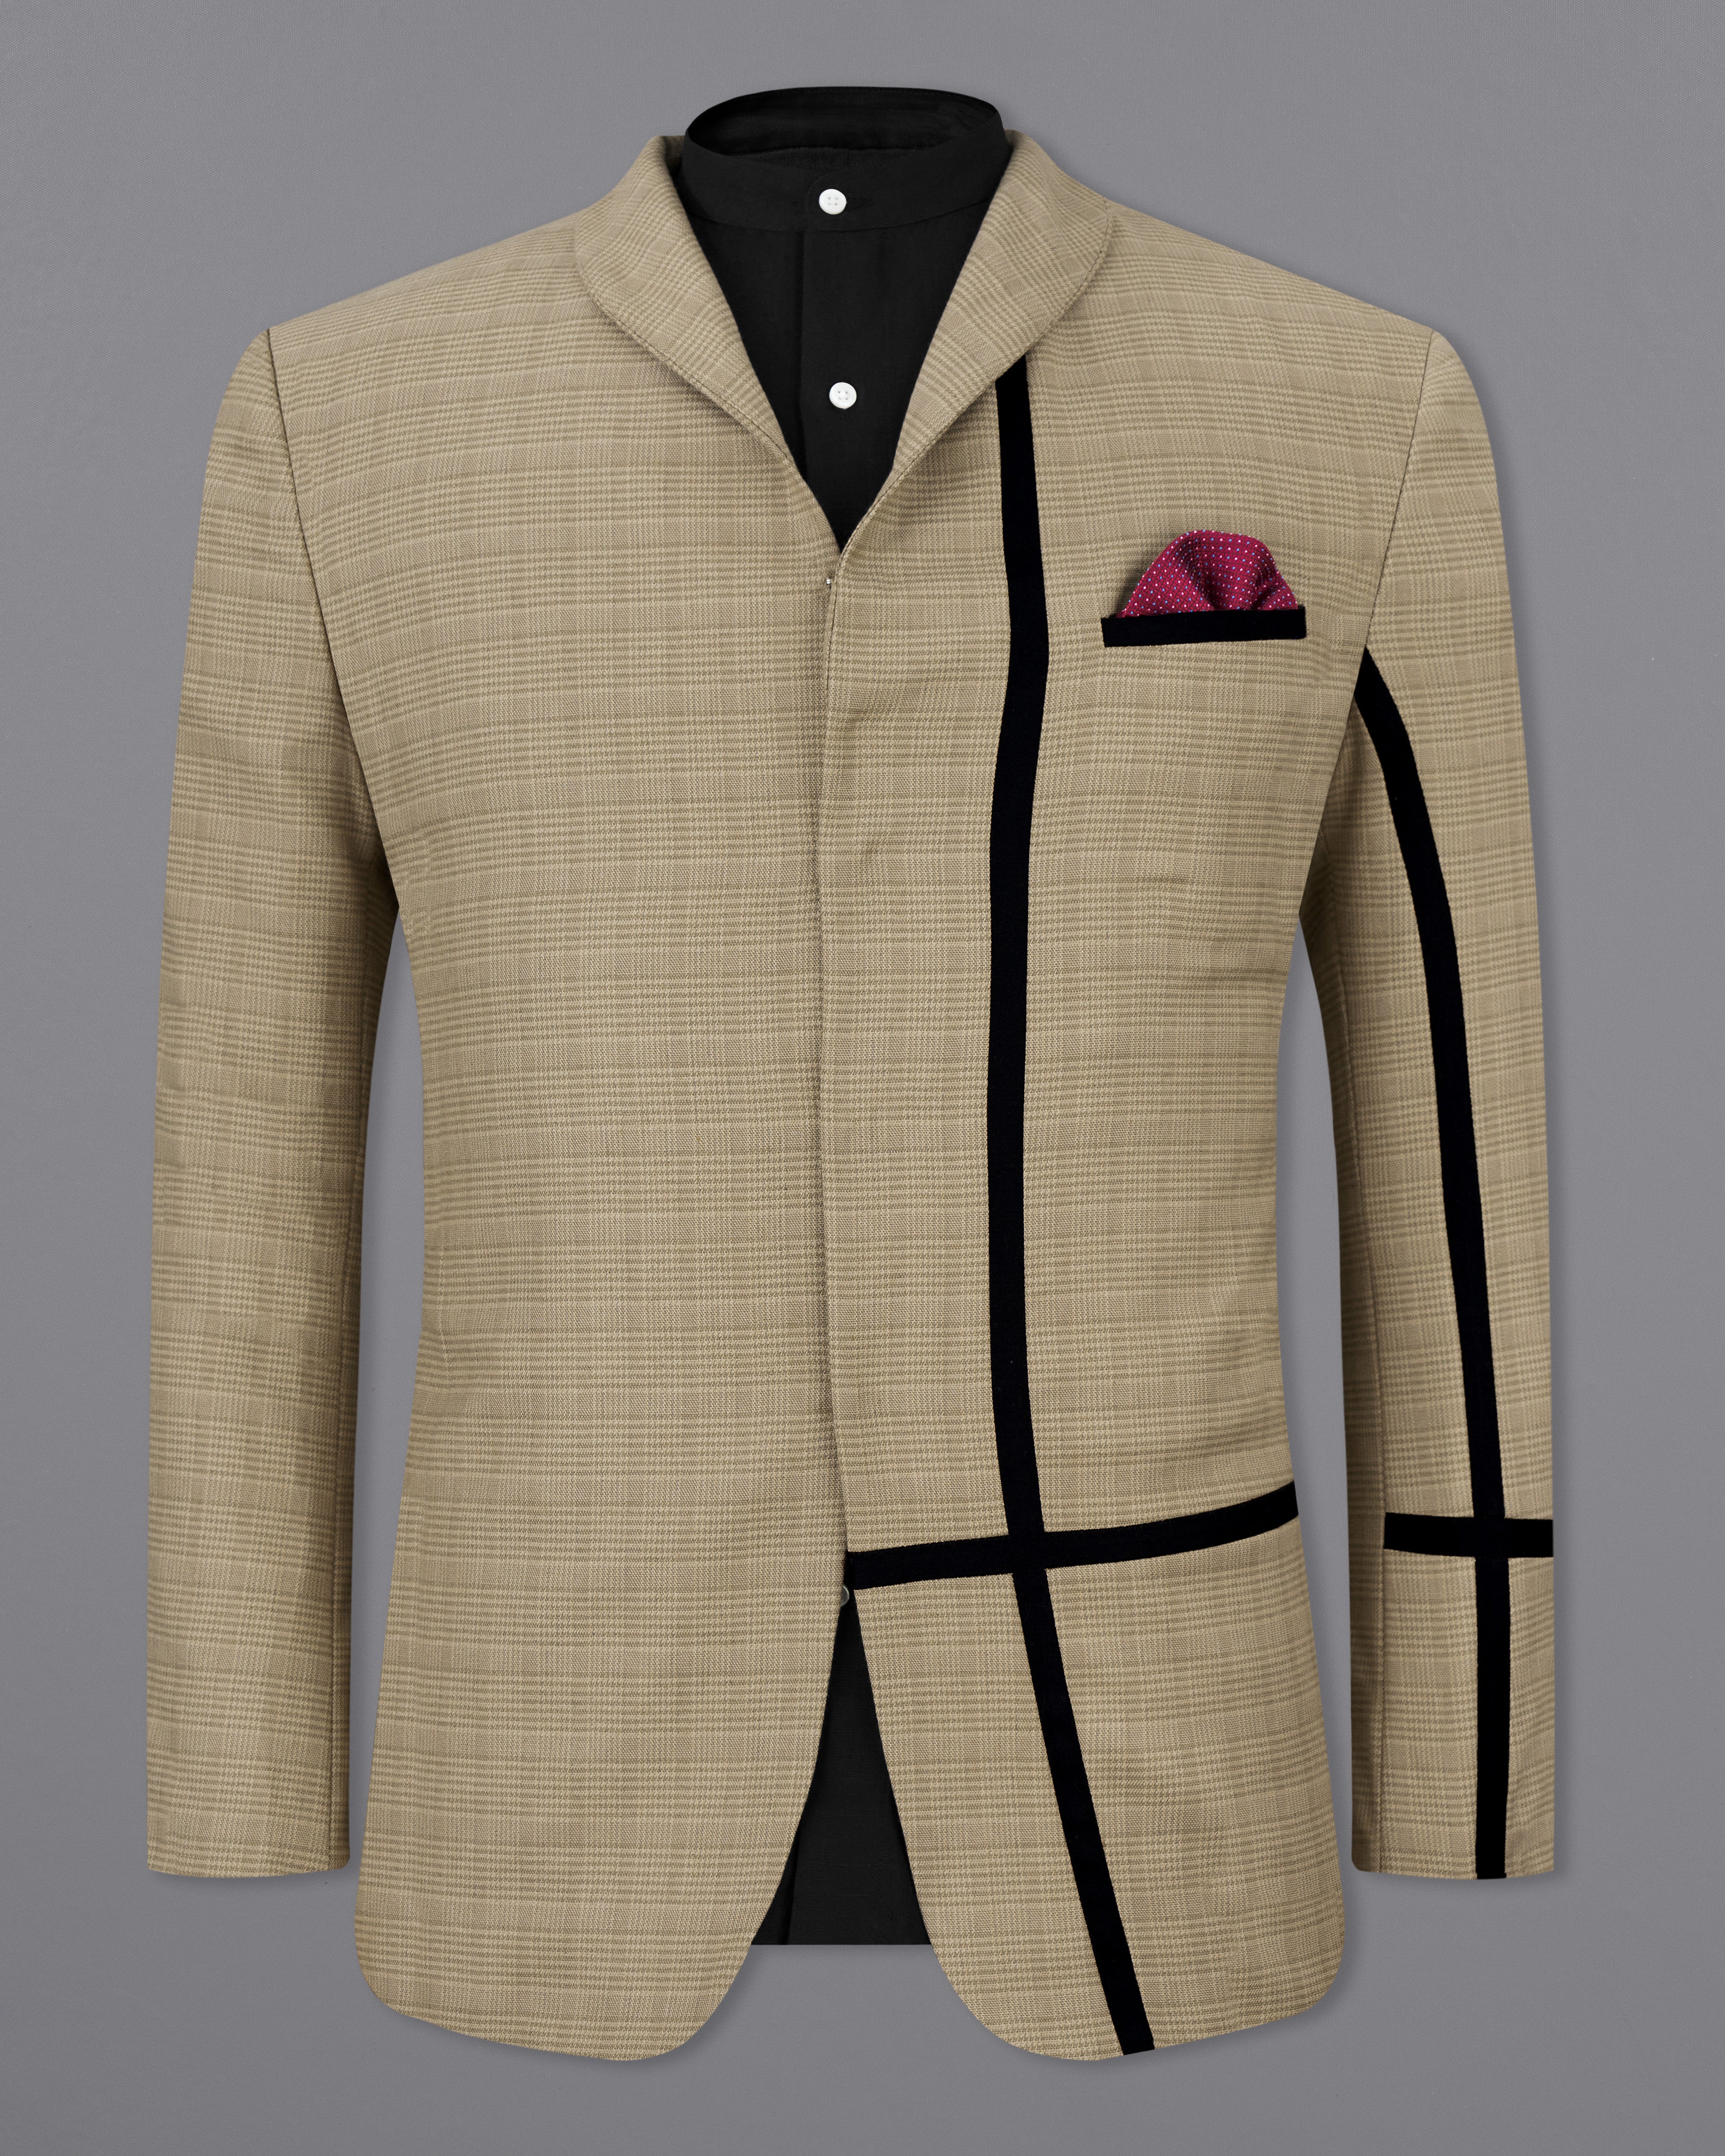 Pale Taupe Brown Plaid with Black Patchwork Wool Rich Blazer BL2511-D20-36, BL2511-D20-38, BL2511-D20-40, BL2511-D20-42, BL2511-D20-44, BL2511-D20-46, BL2511-D20-48, BL2511-D20-50, BL2511-D20-52, BL2511-D20-54, BL2511-D20-56, BL2511-D20-58, BL2511-D20-60